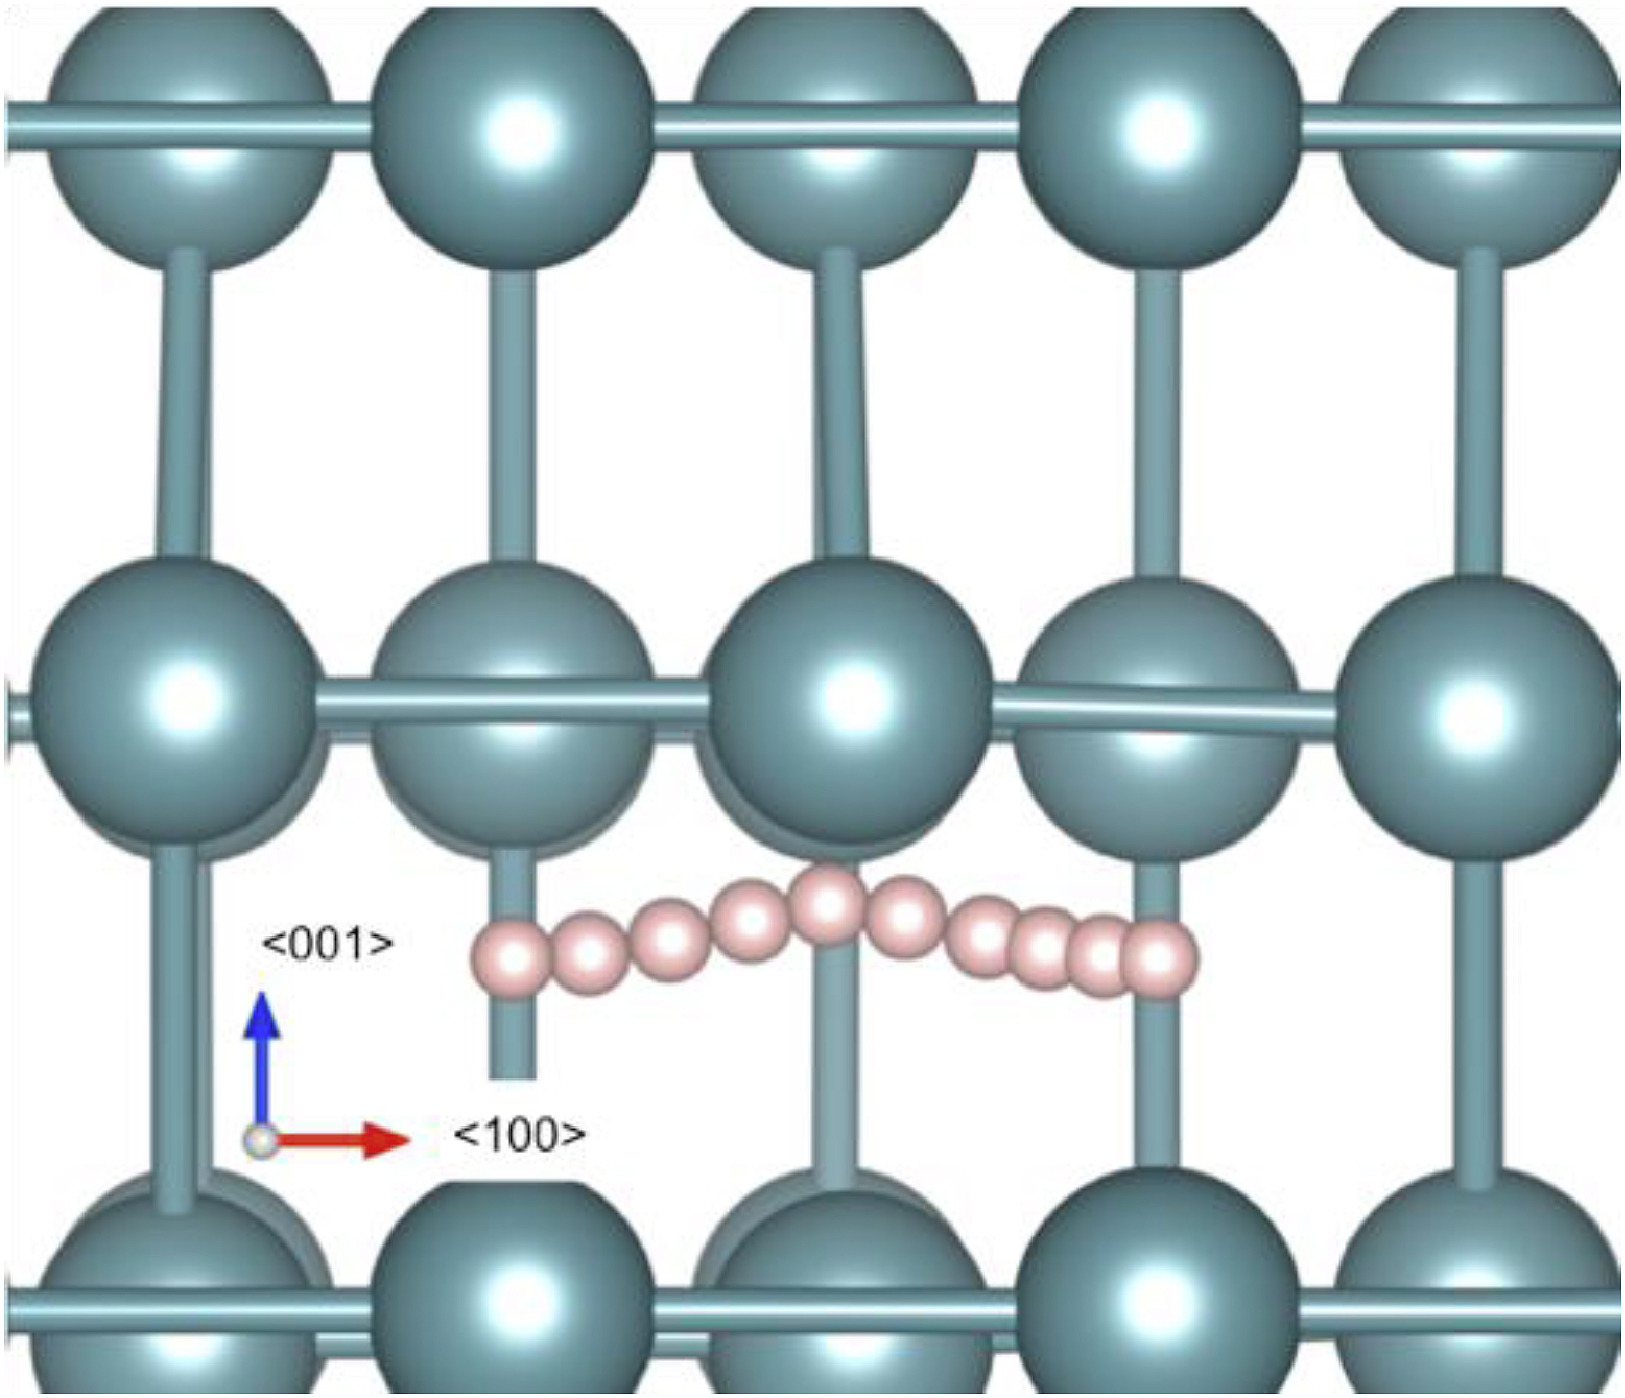 The calculated low-barrier diffusion pathway of hydrogen (white spheres) through the α-U lattice (blue-gray spheres). The <100>-only pathway was determined to be the most likely.